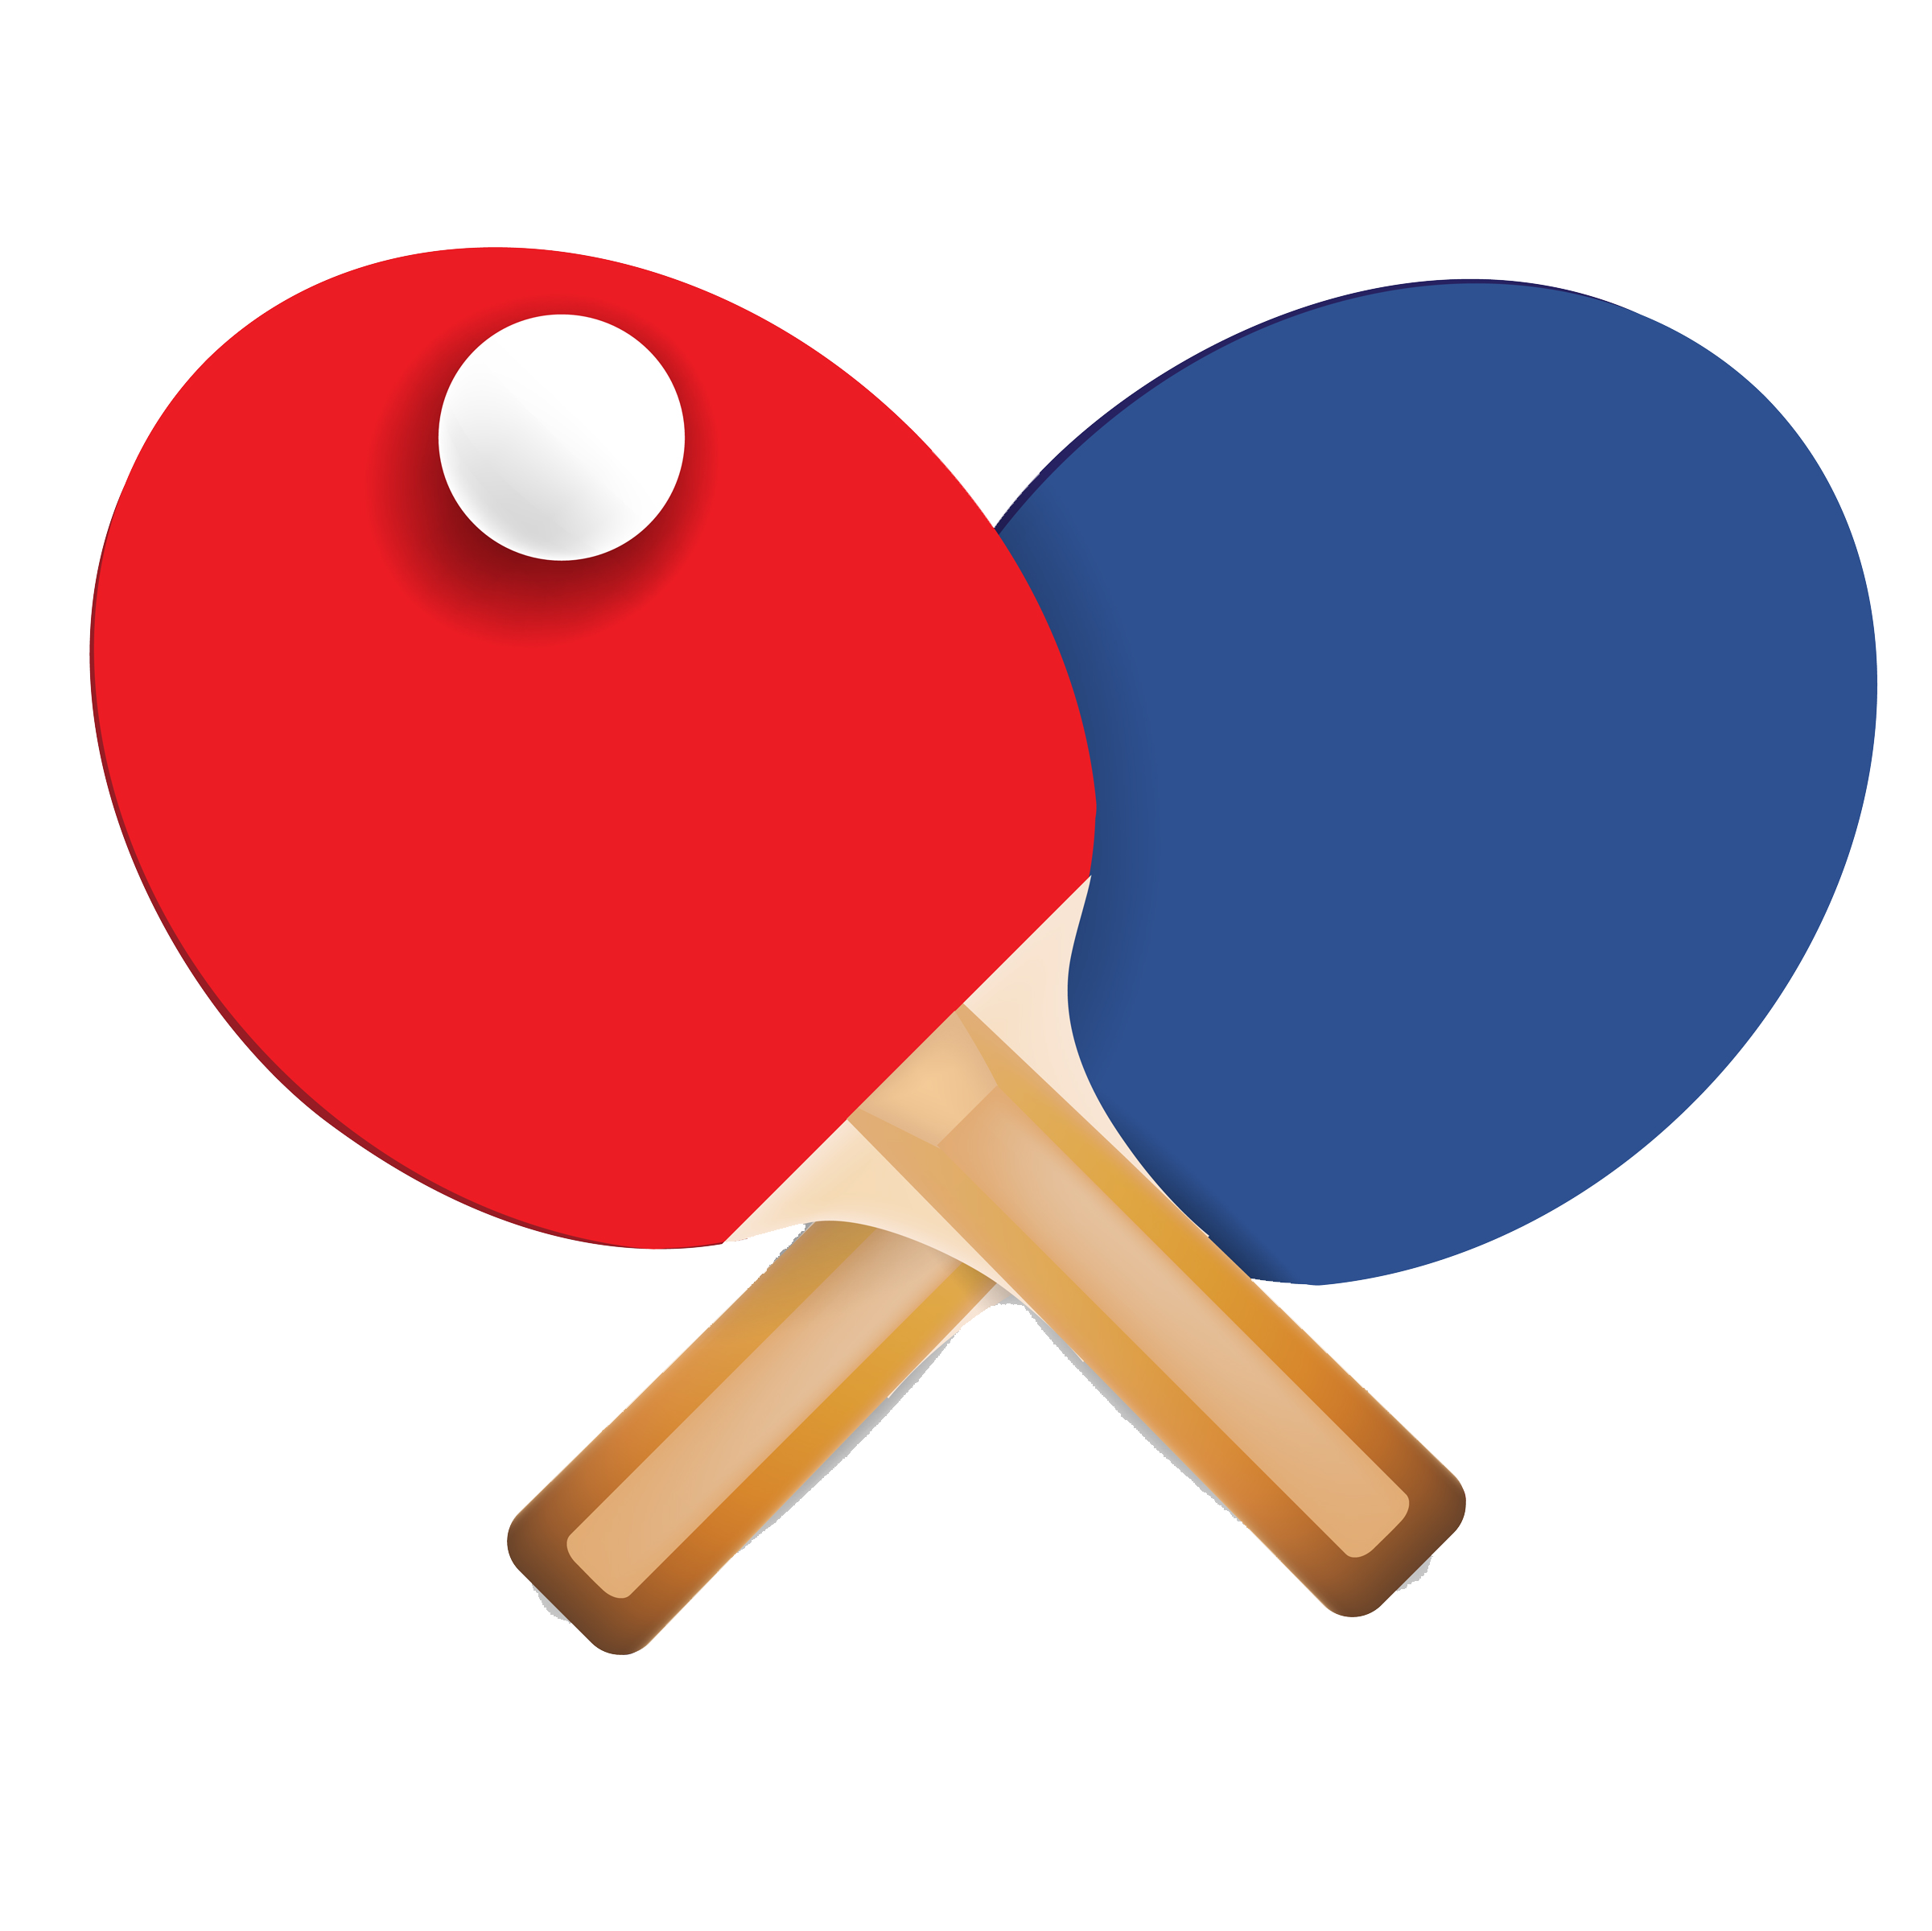 Ping Pong Ball Png Ping Pong Clipart Table Tennis Player Hd Png | Hot ...